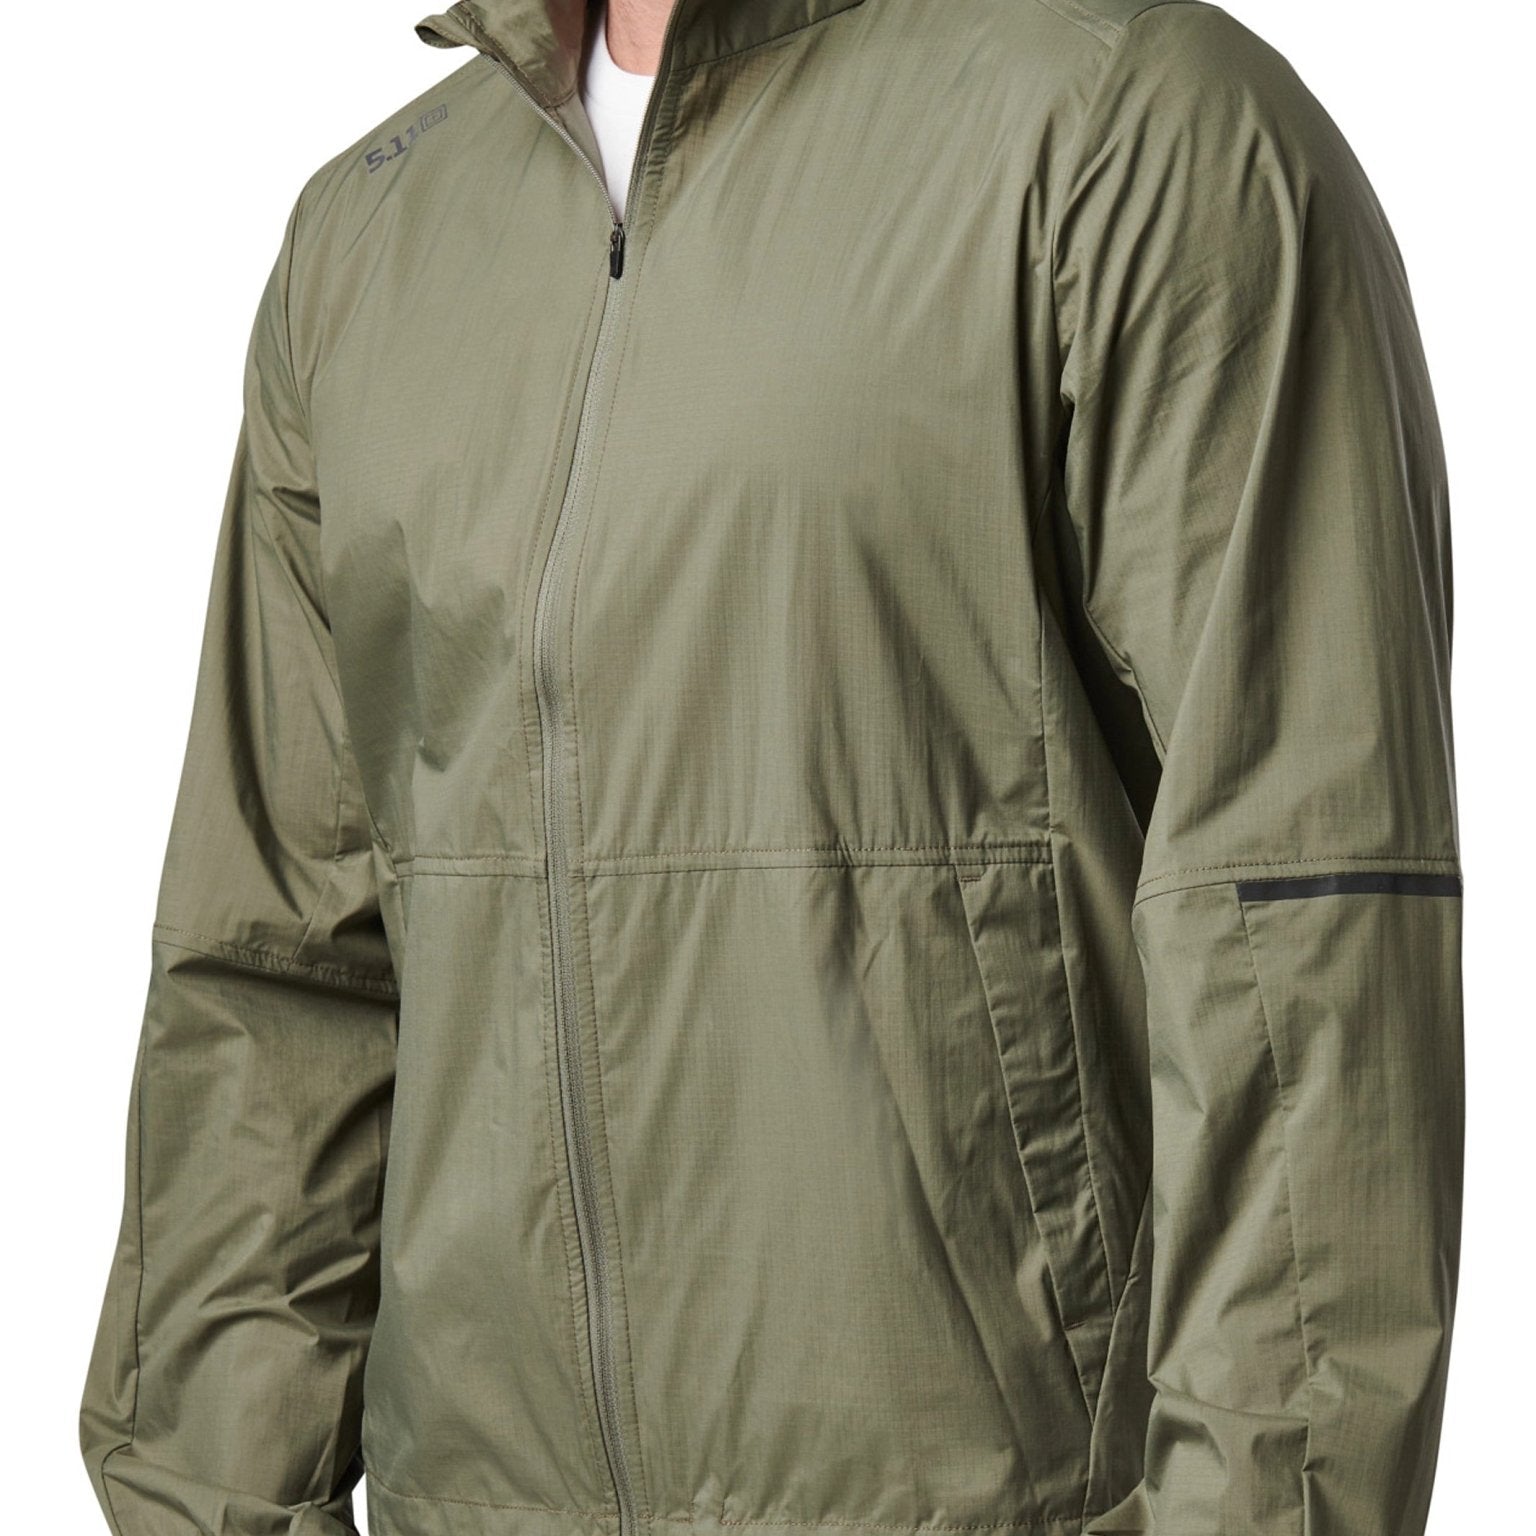 4elementsclothing5.11 Tactical5.11 Tactical - PT-R PACKABLE JACKET - Nylon Mini Ripstop - Style 82140Coats & Jackets82140-831-S